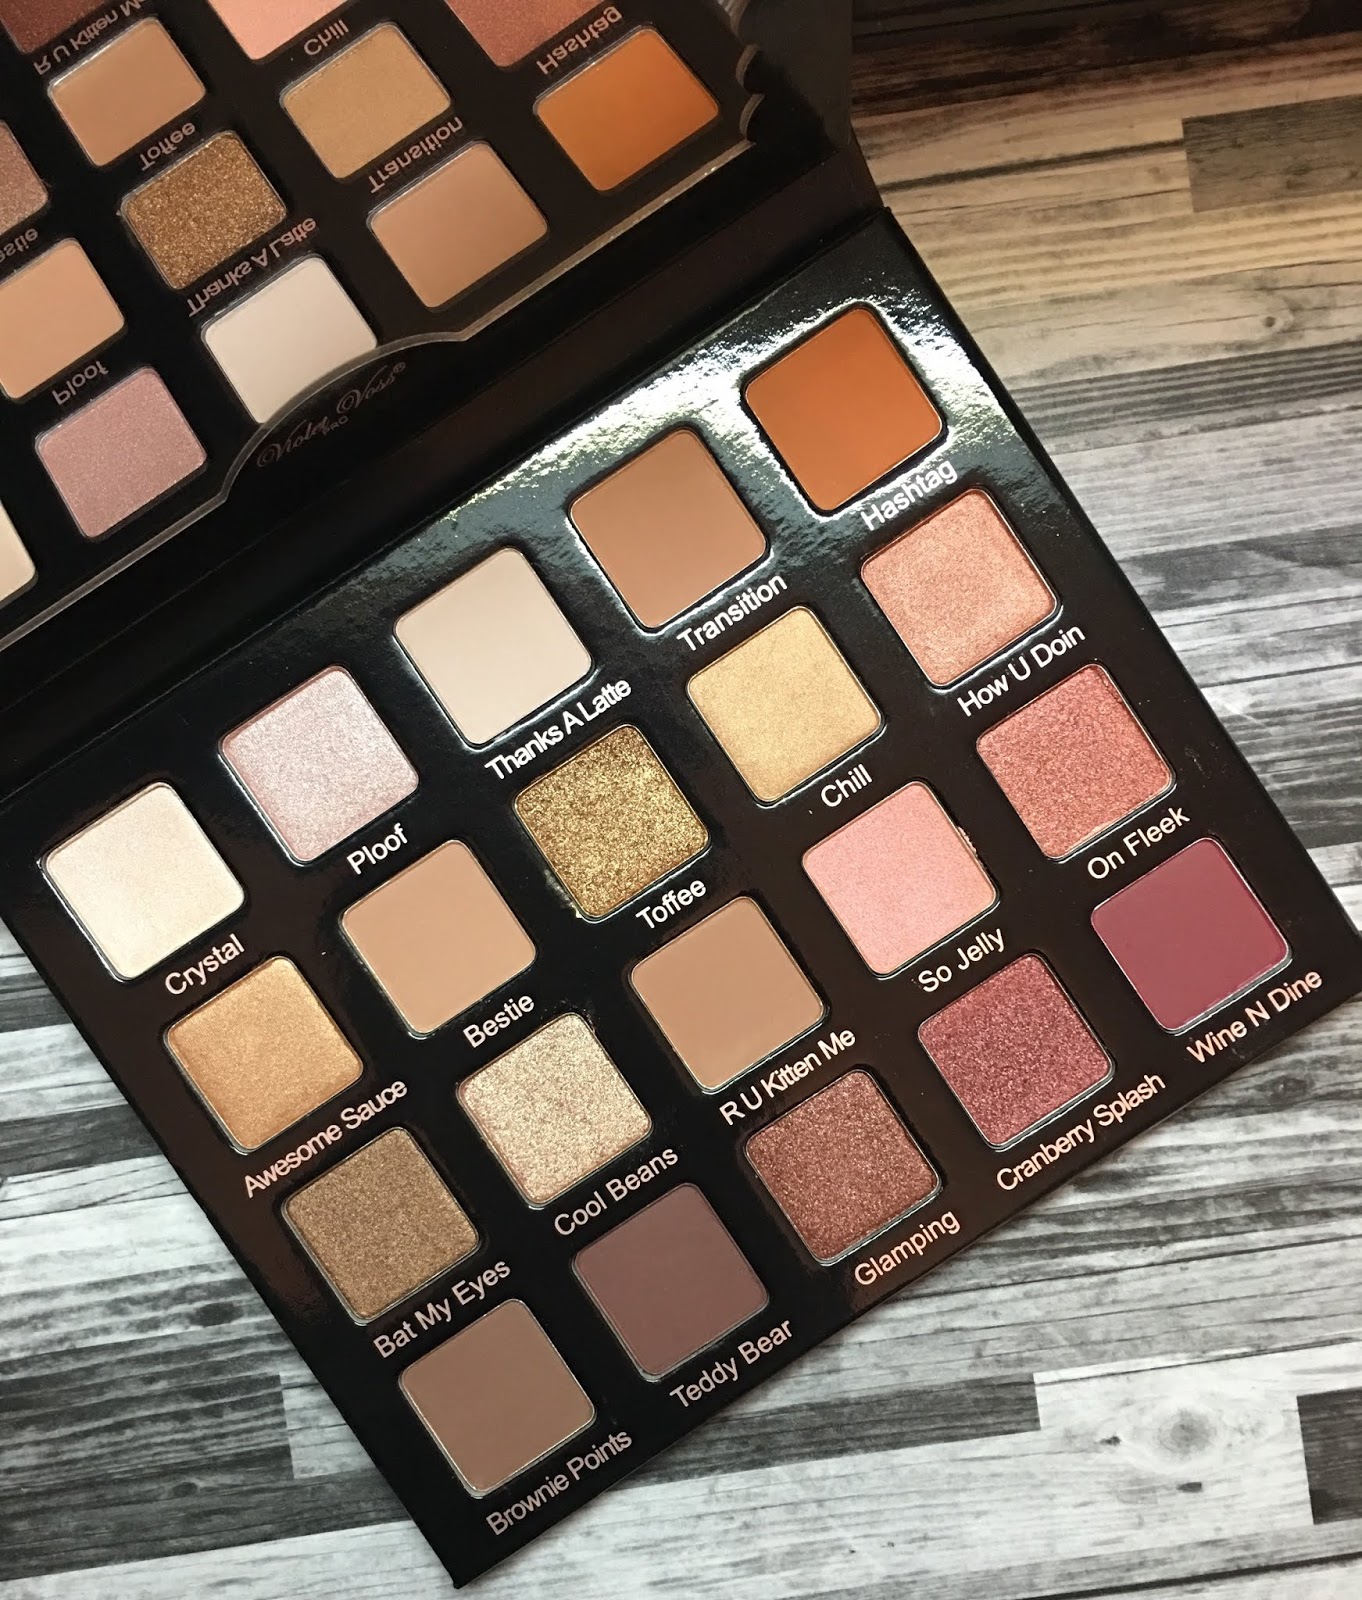 violet voss palette holy grail review